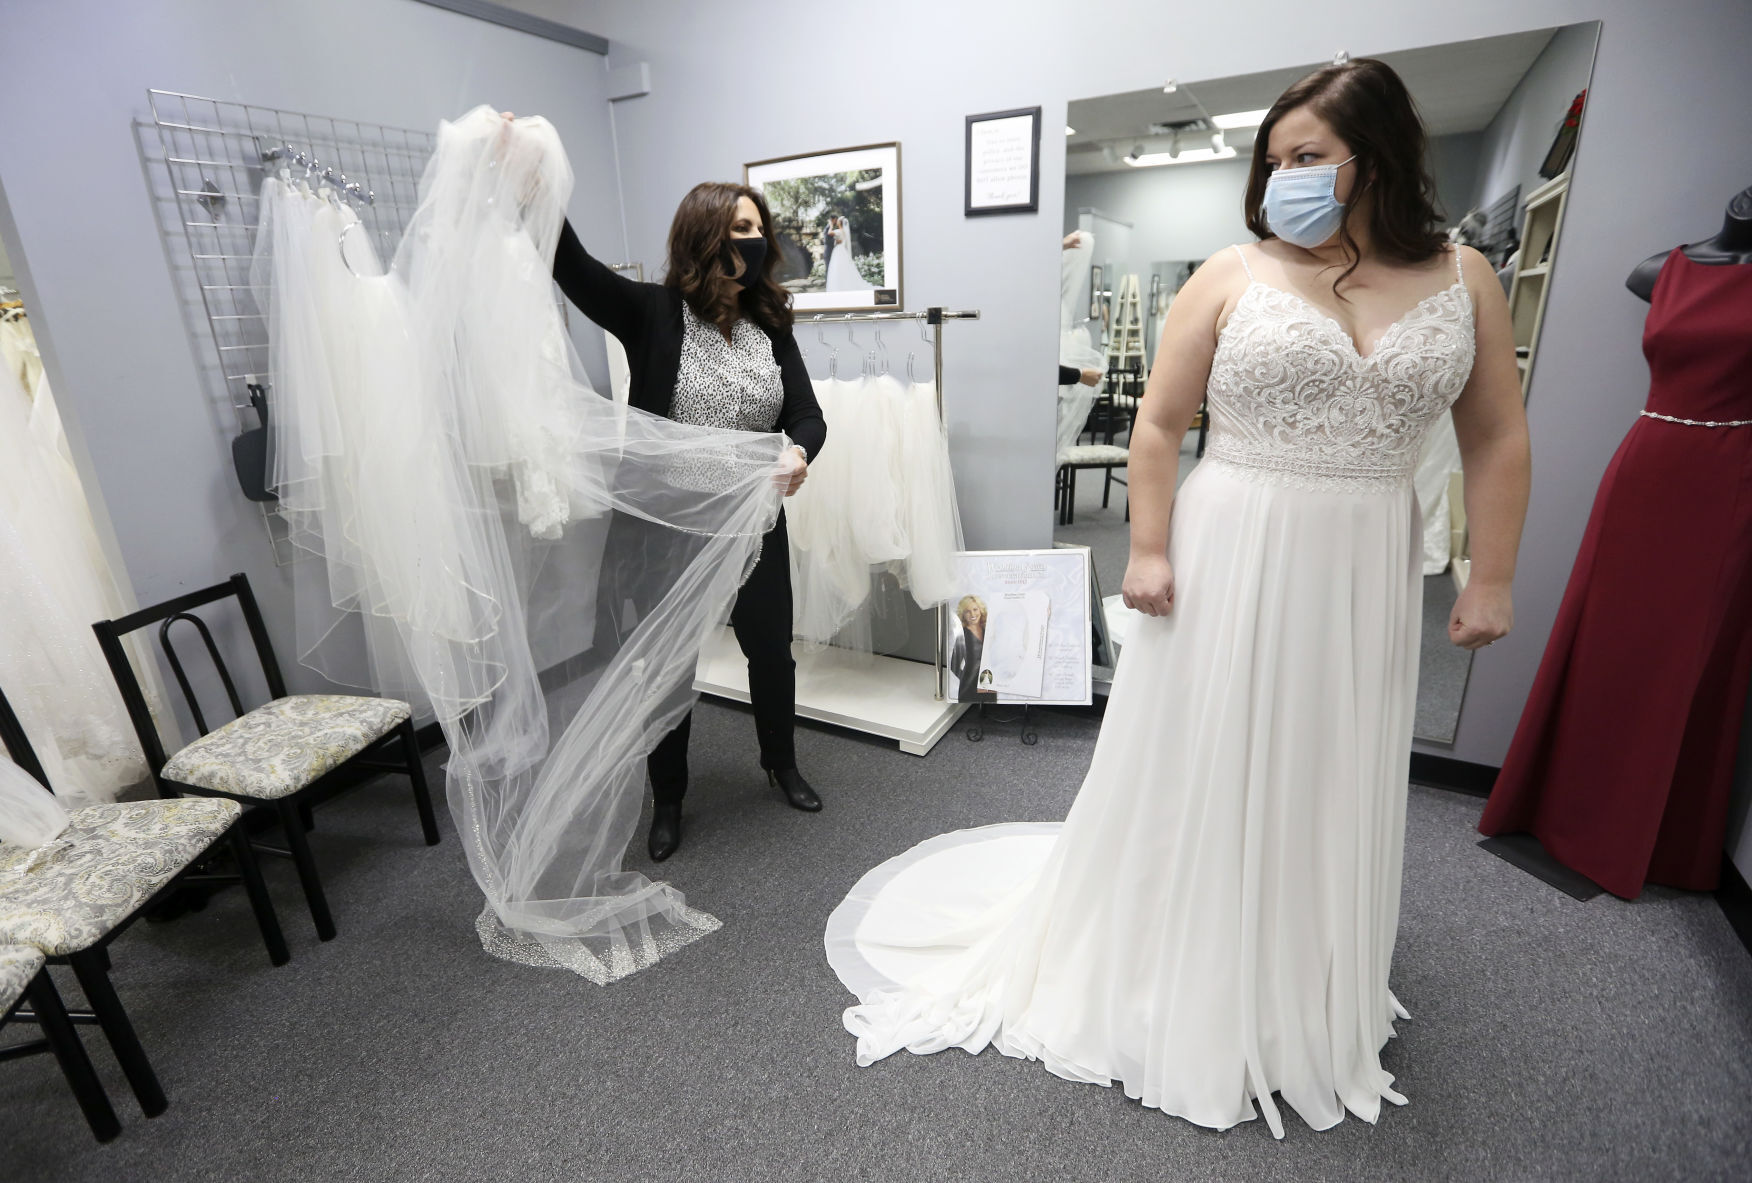 Owner Sherrie Keating (left) assists Ally O’Rourke, of Dubuque, as she tries on bridal dresses and accessories at Cheryl-Ann Bridals & Tuxedos in Dubuque on Tuesday. Engaged couples are look forward to the new year. PHOTO CREDIT: NICKI KOHL